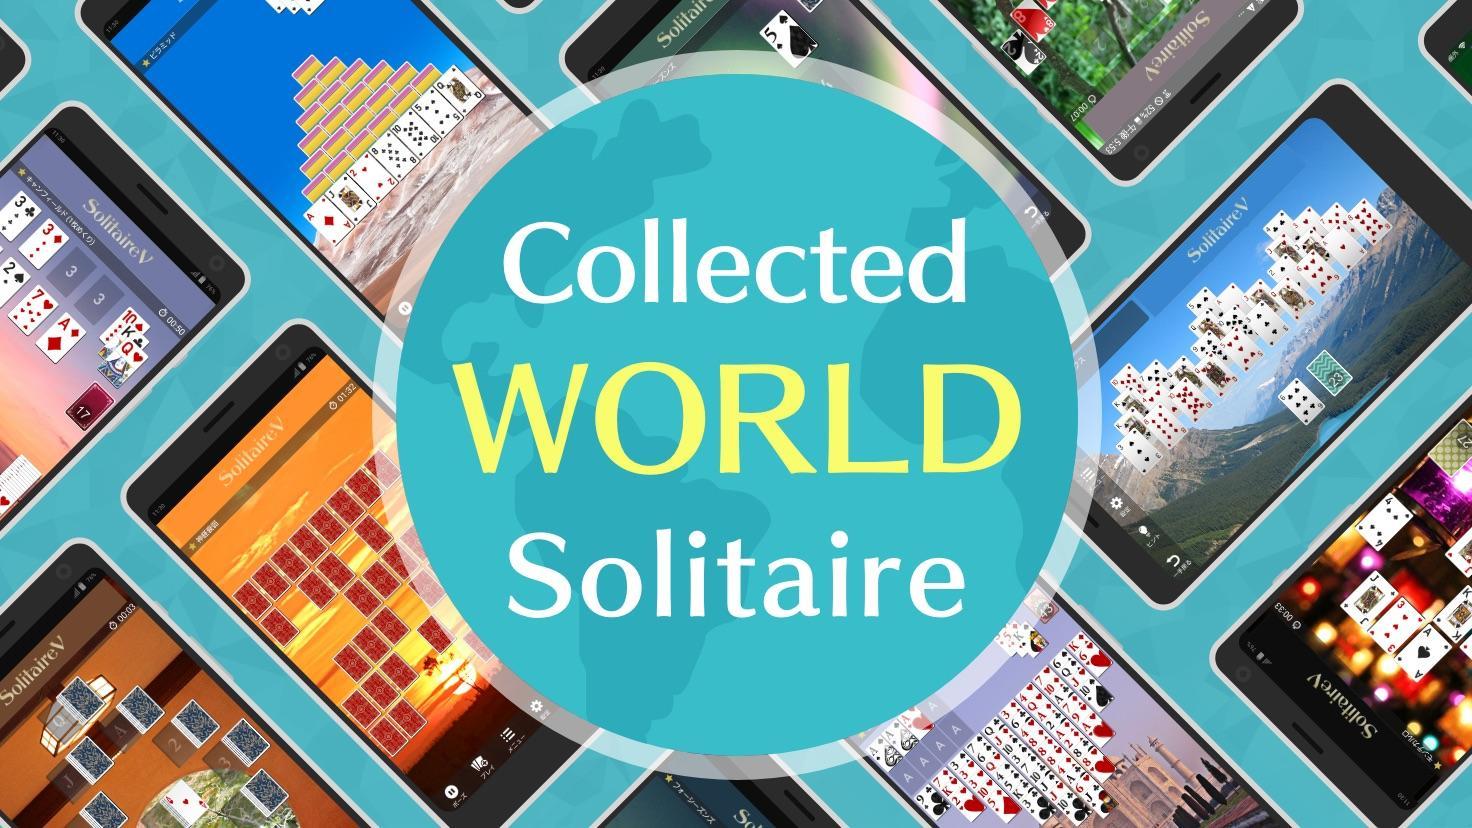 Solitaire Victory - 2020 Solitaire Collection 100 8.3.2 Screenshot 10